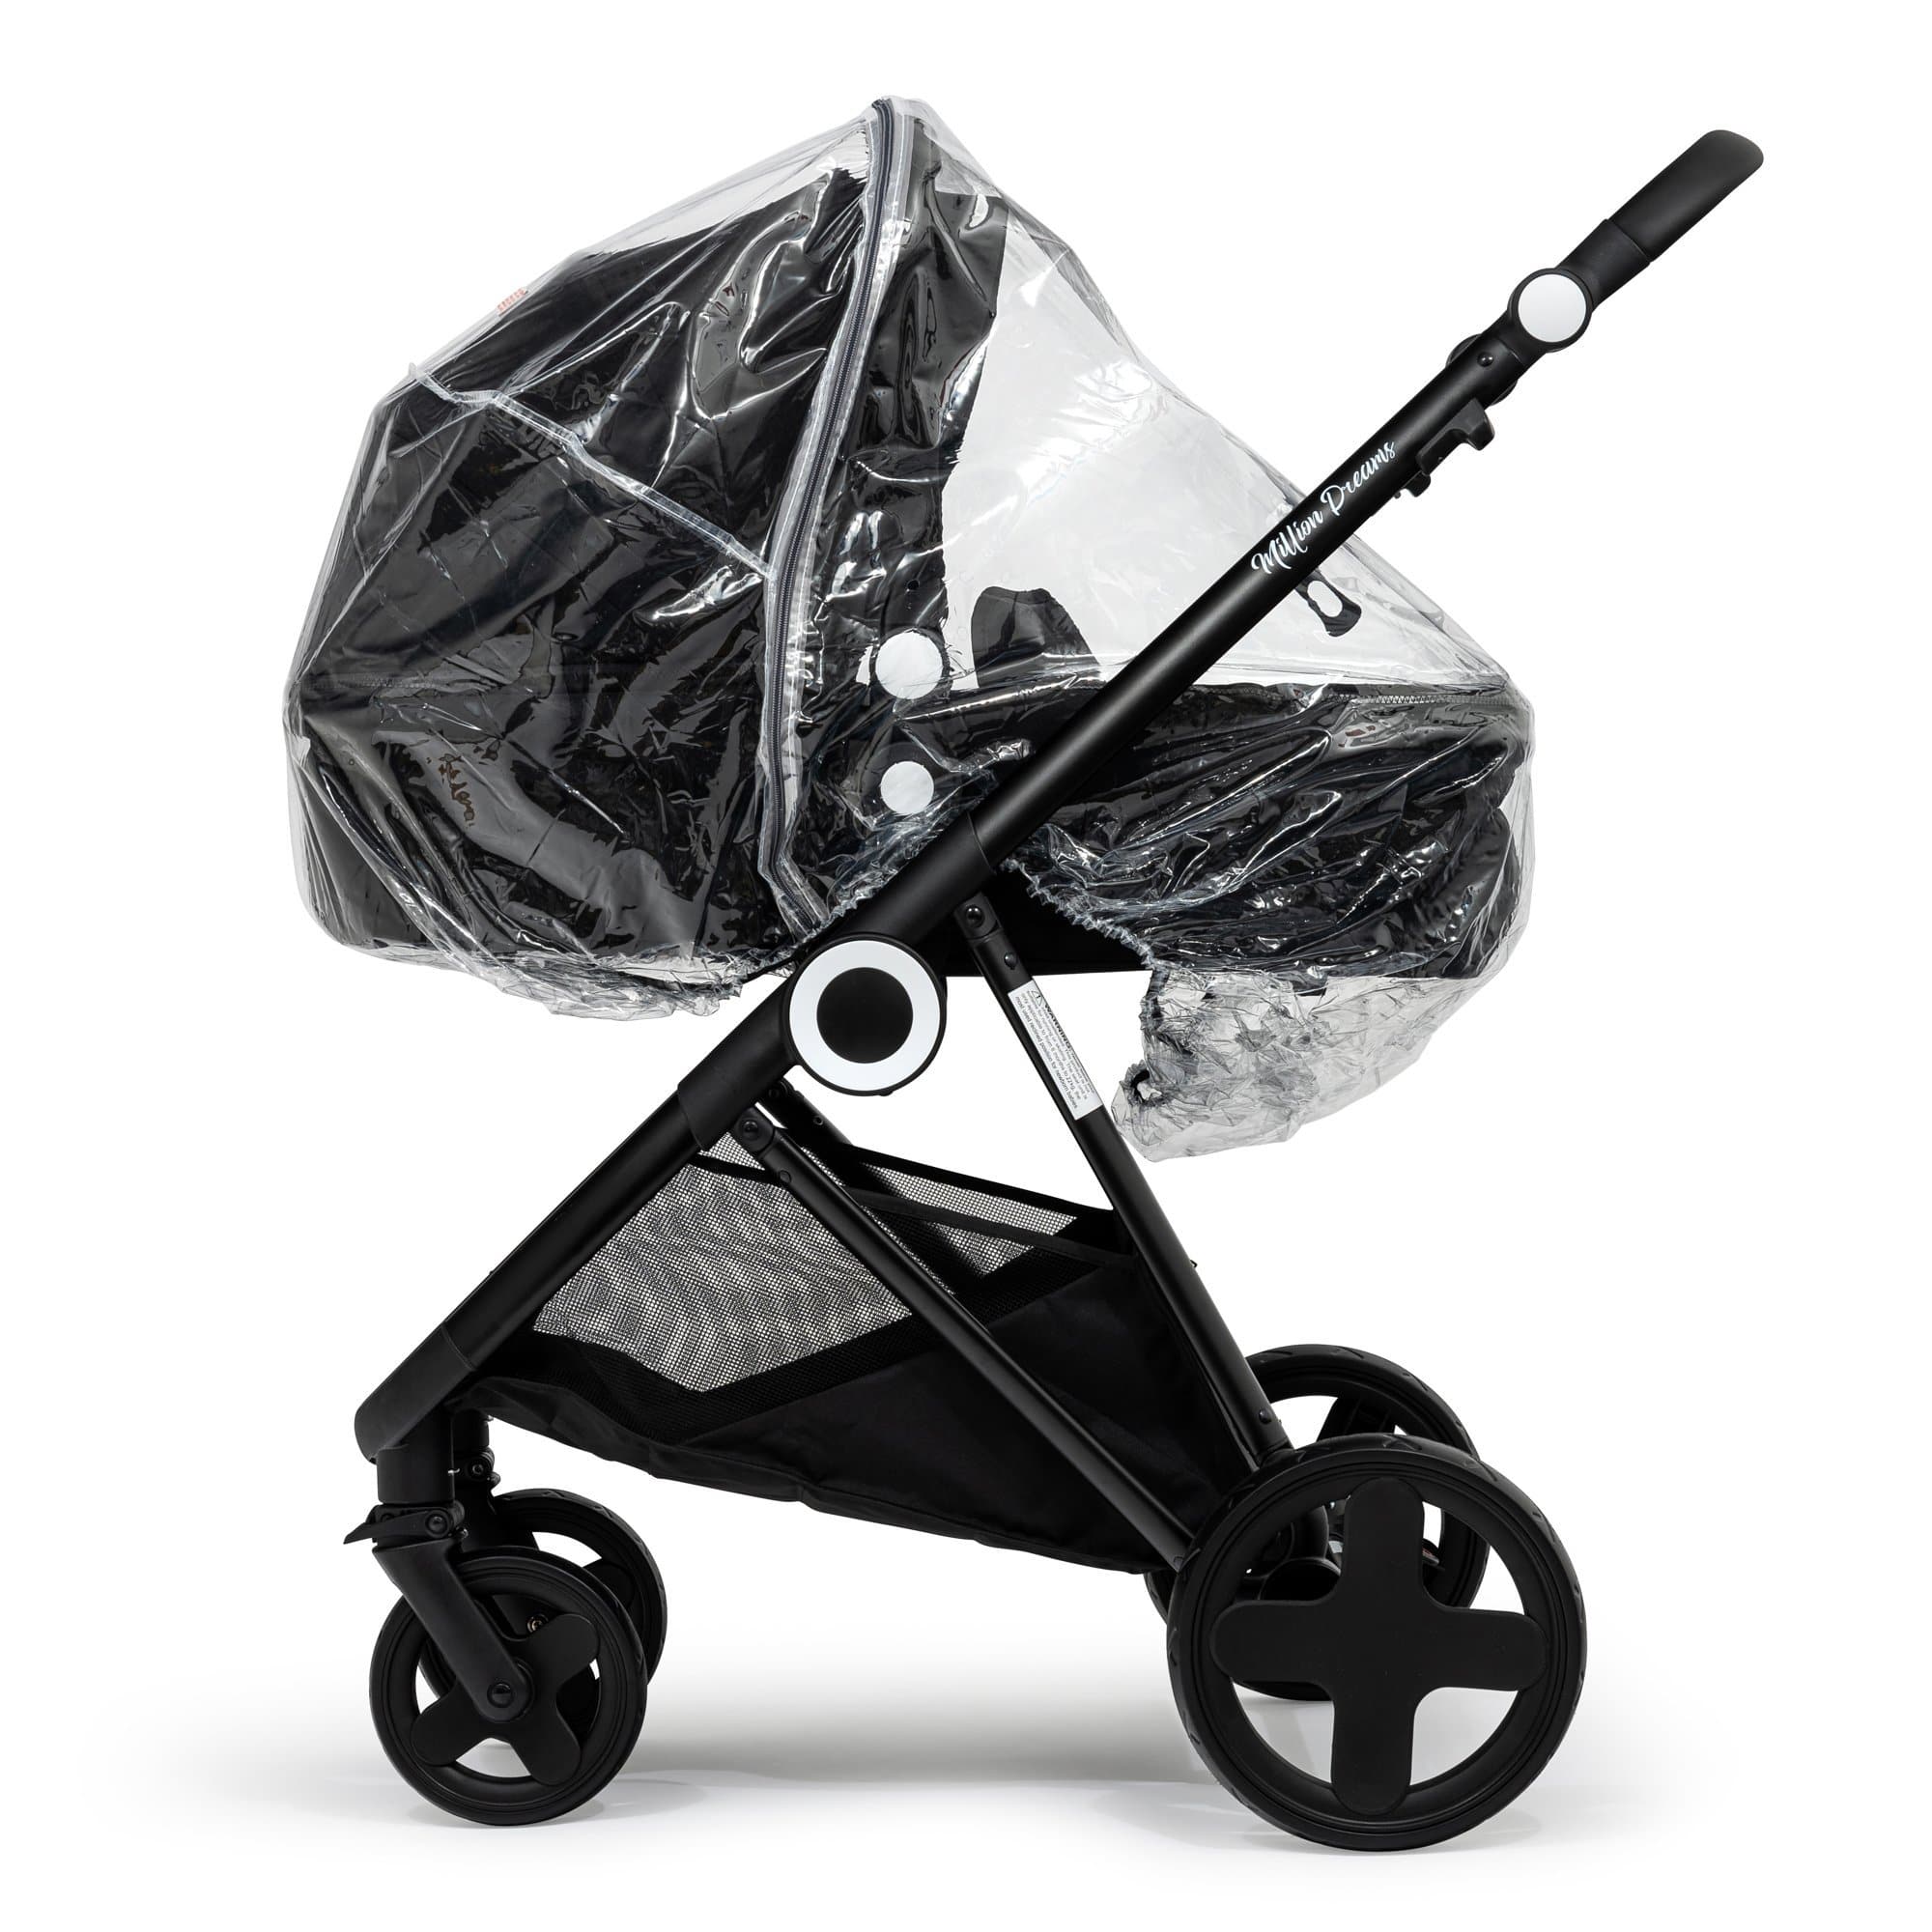 2 in 1 Rain Cover Compatible with BabySun - Fits All Models - For Your Little One